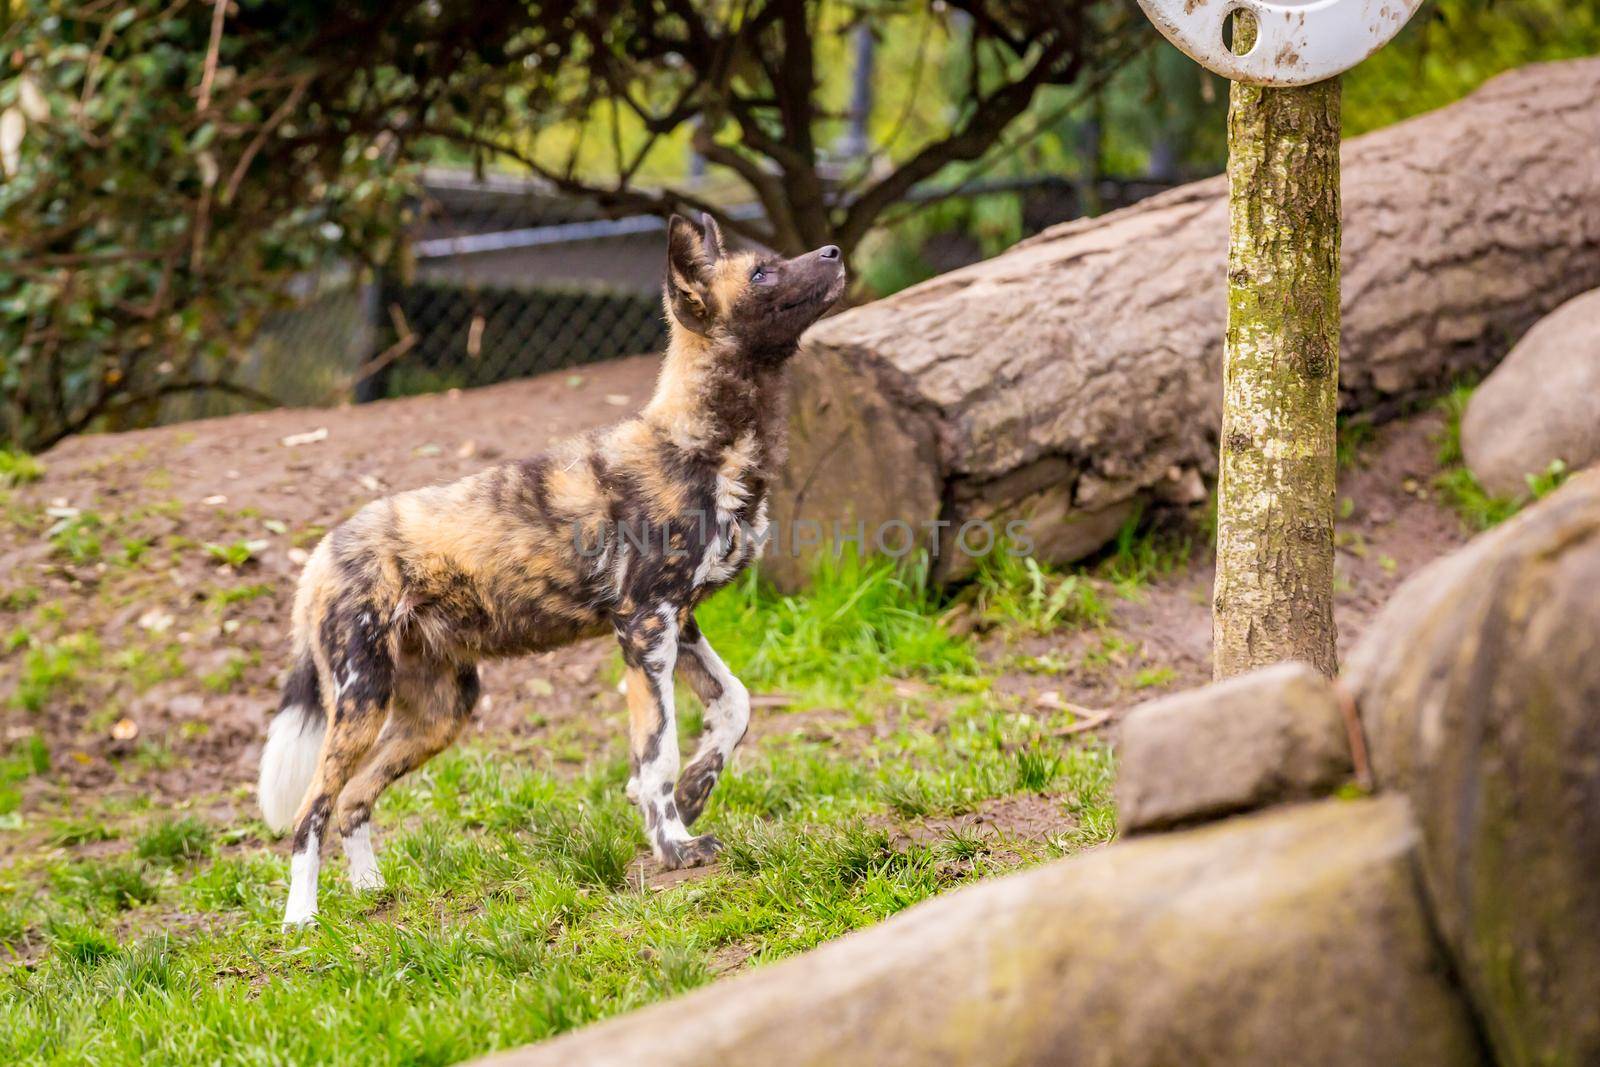 African painted dog play around in Oregon zoo